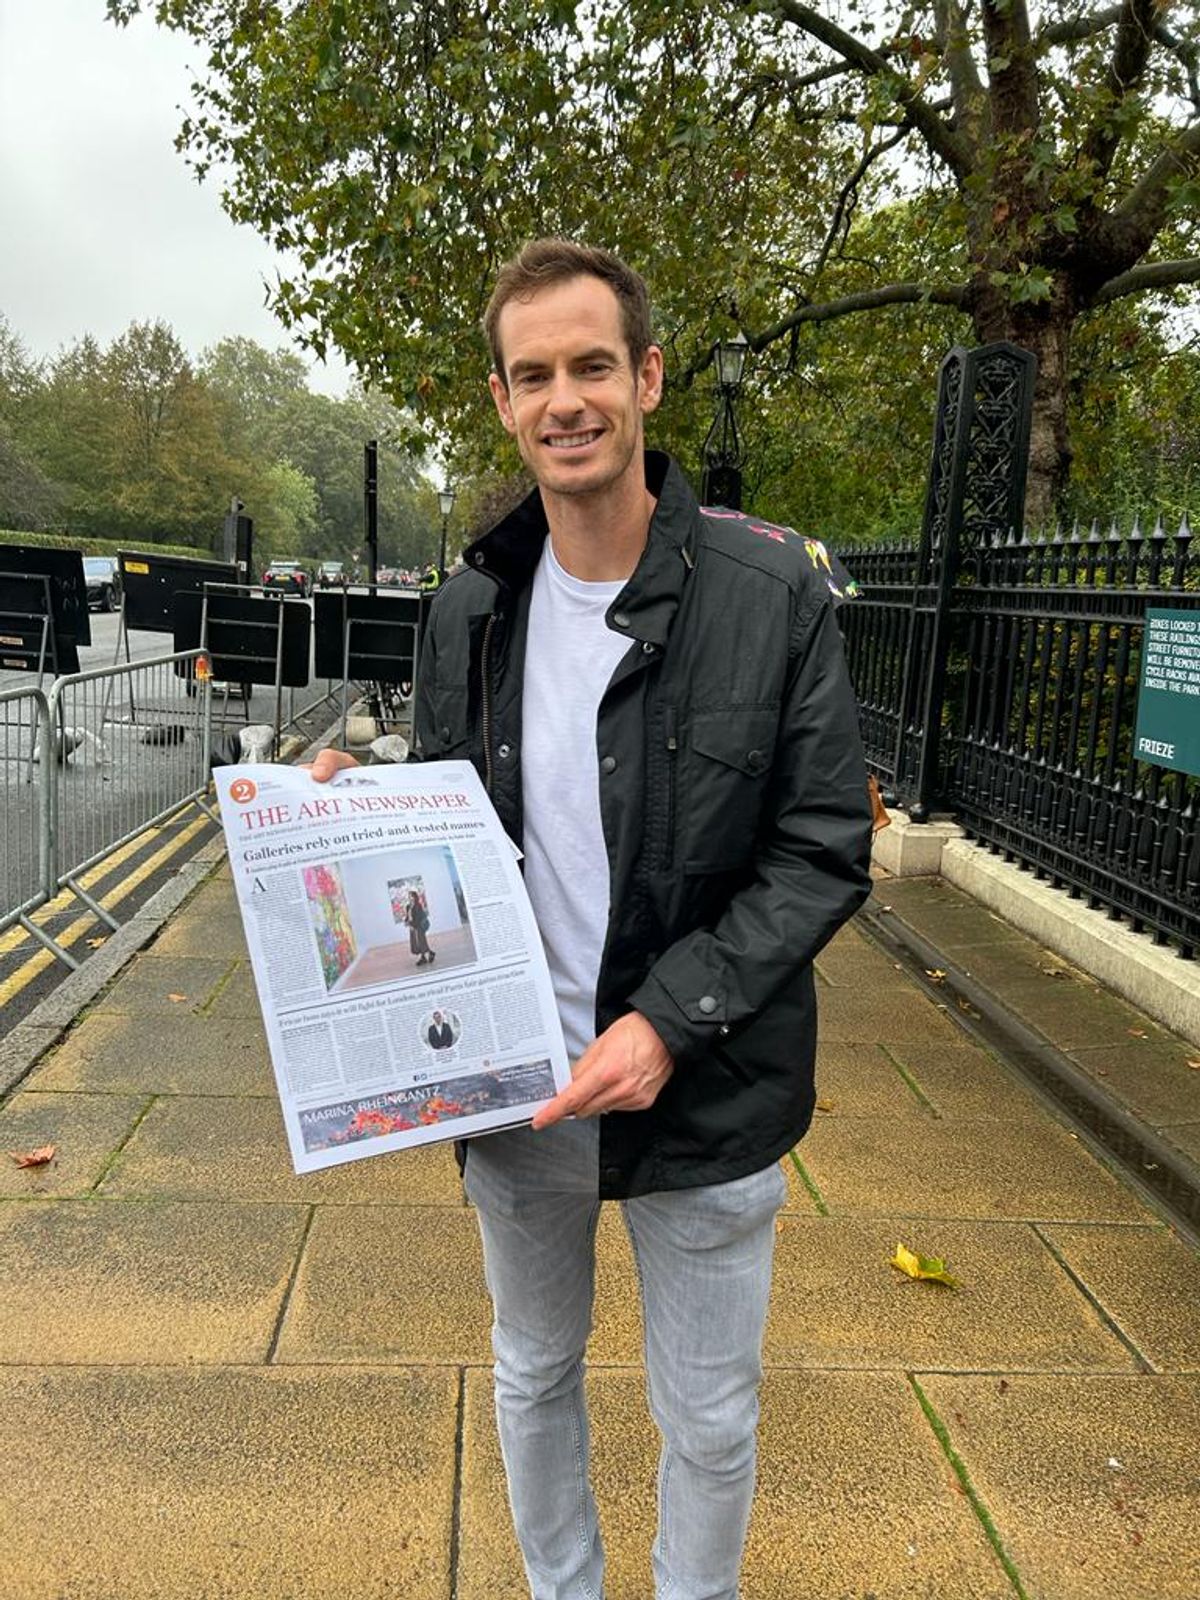 The Art Newspaper is the only game in town, as Andy Murray might say